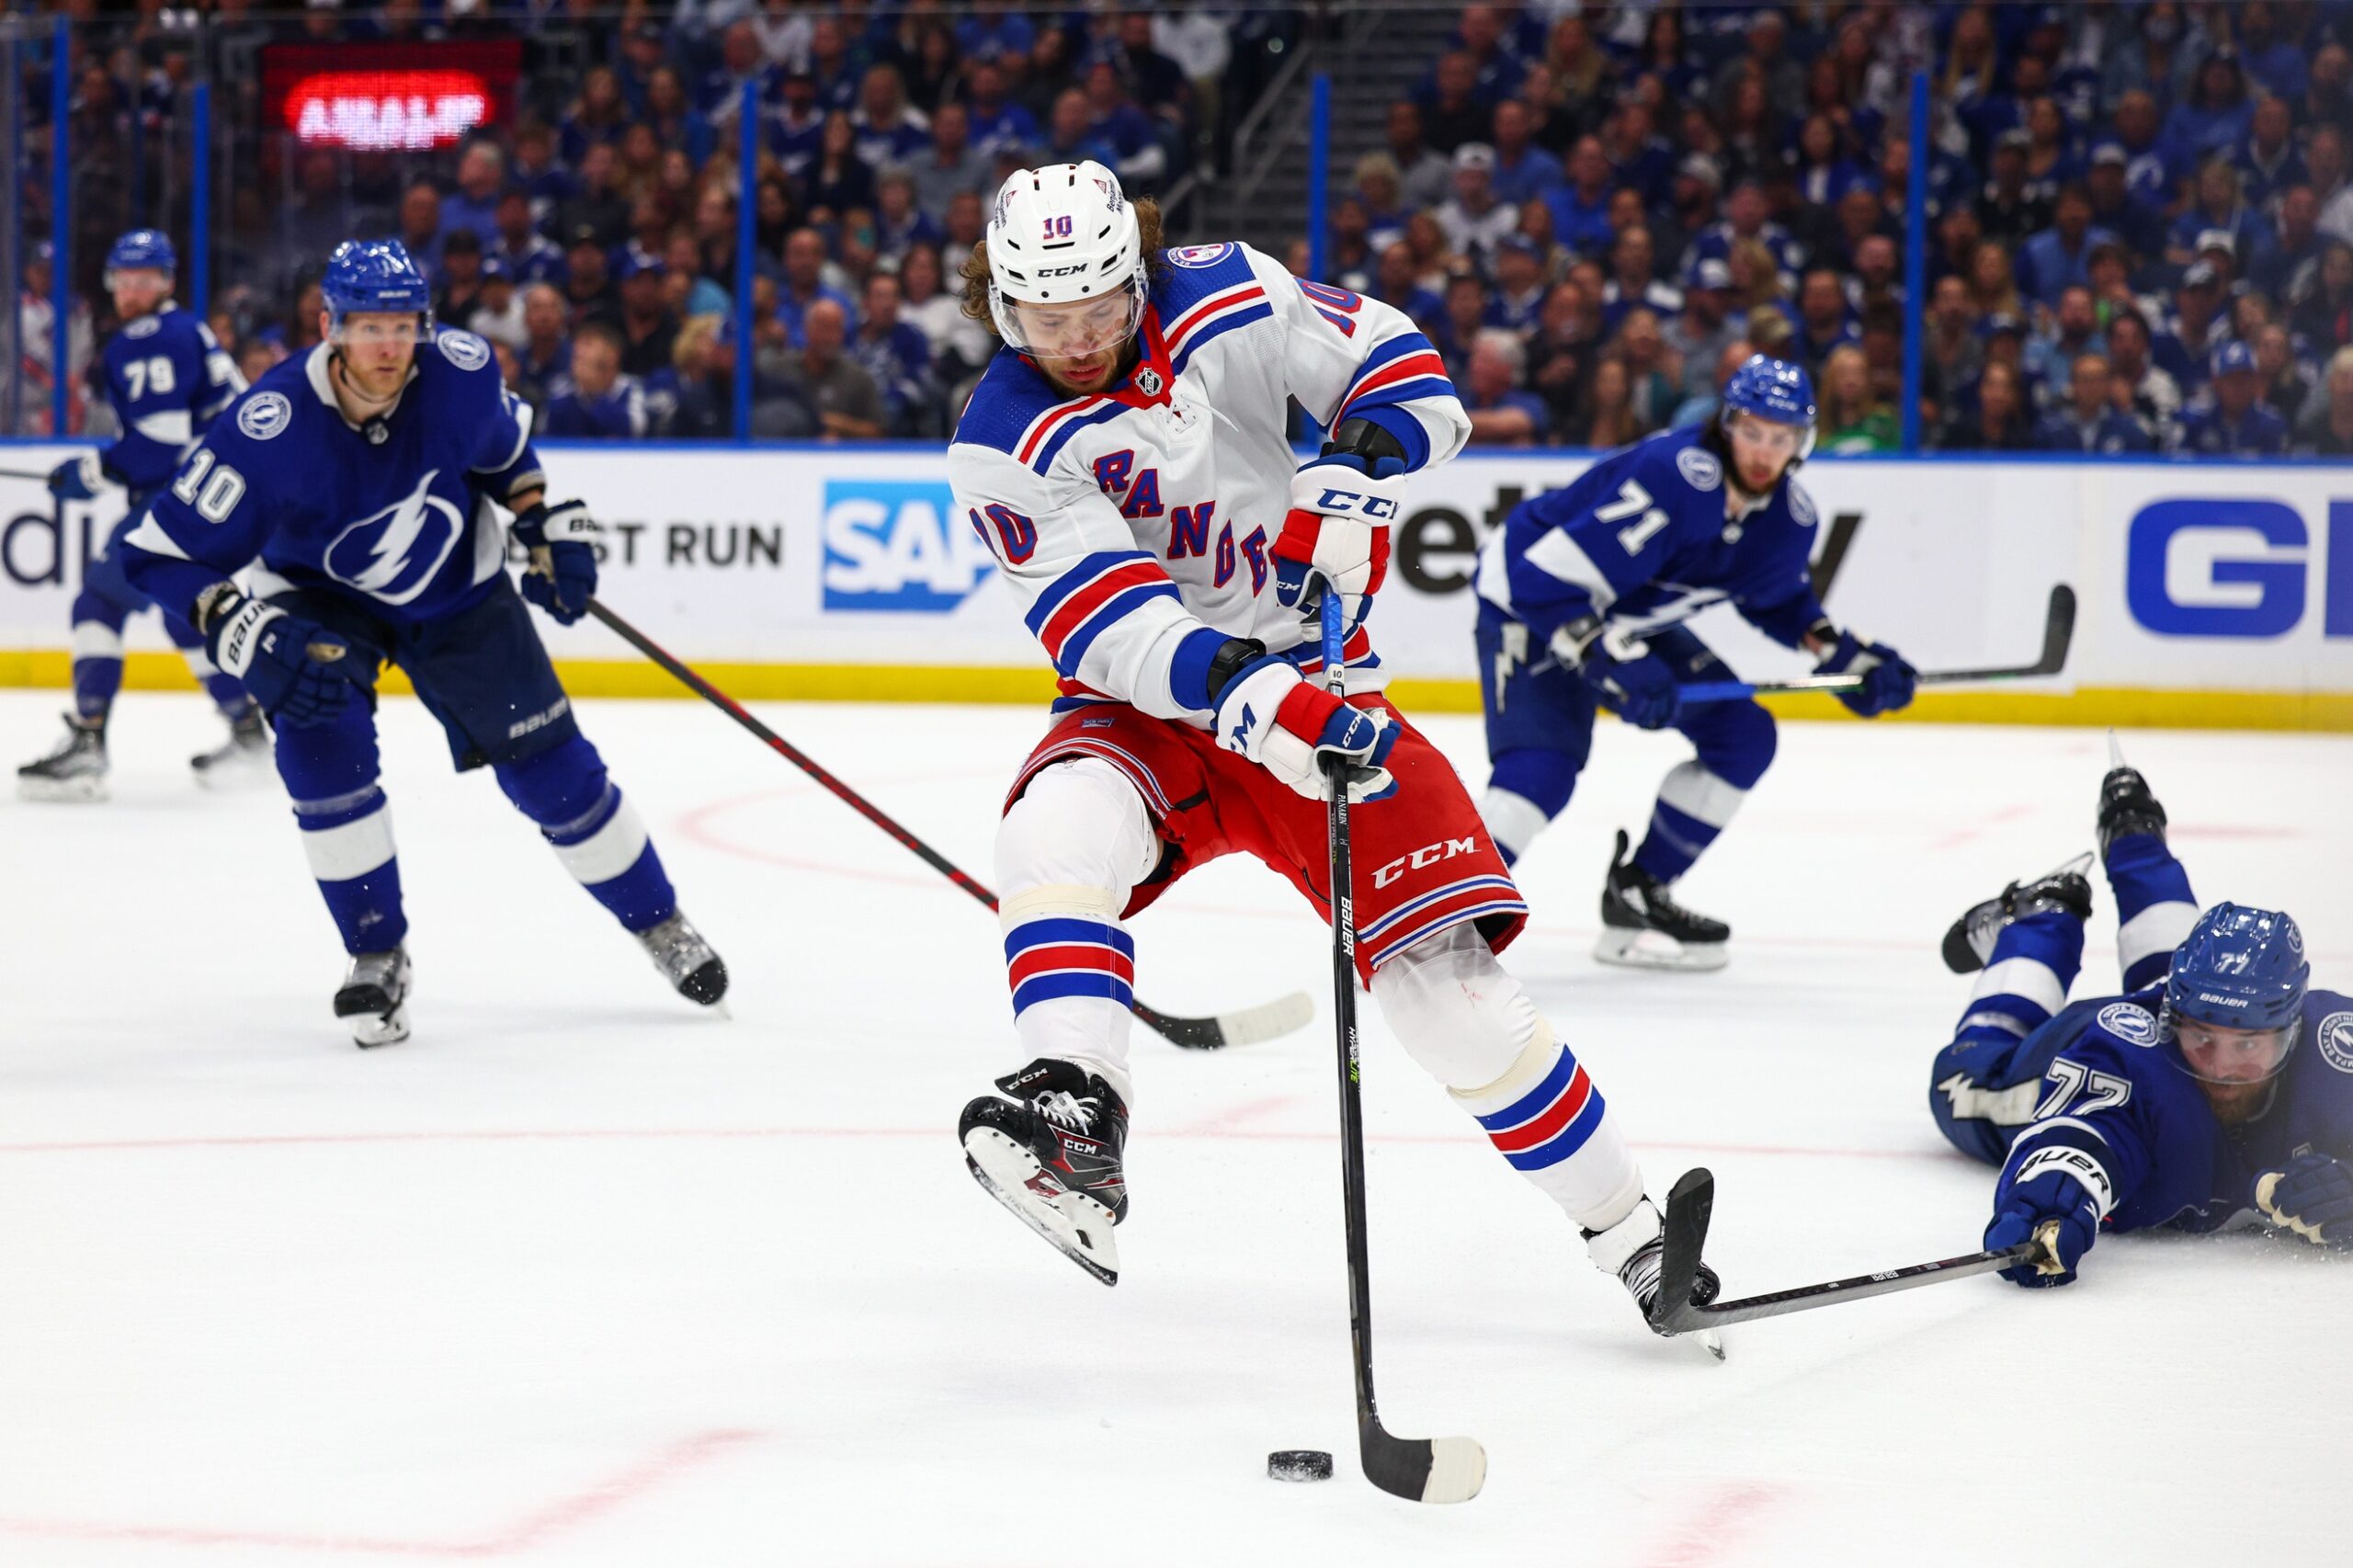 The New York Rangers will win a pivotal Game 5 against the Tampa Bay